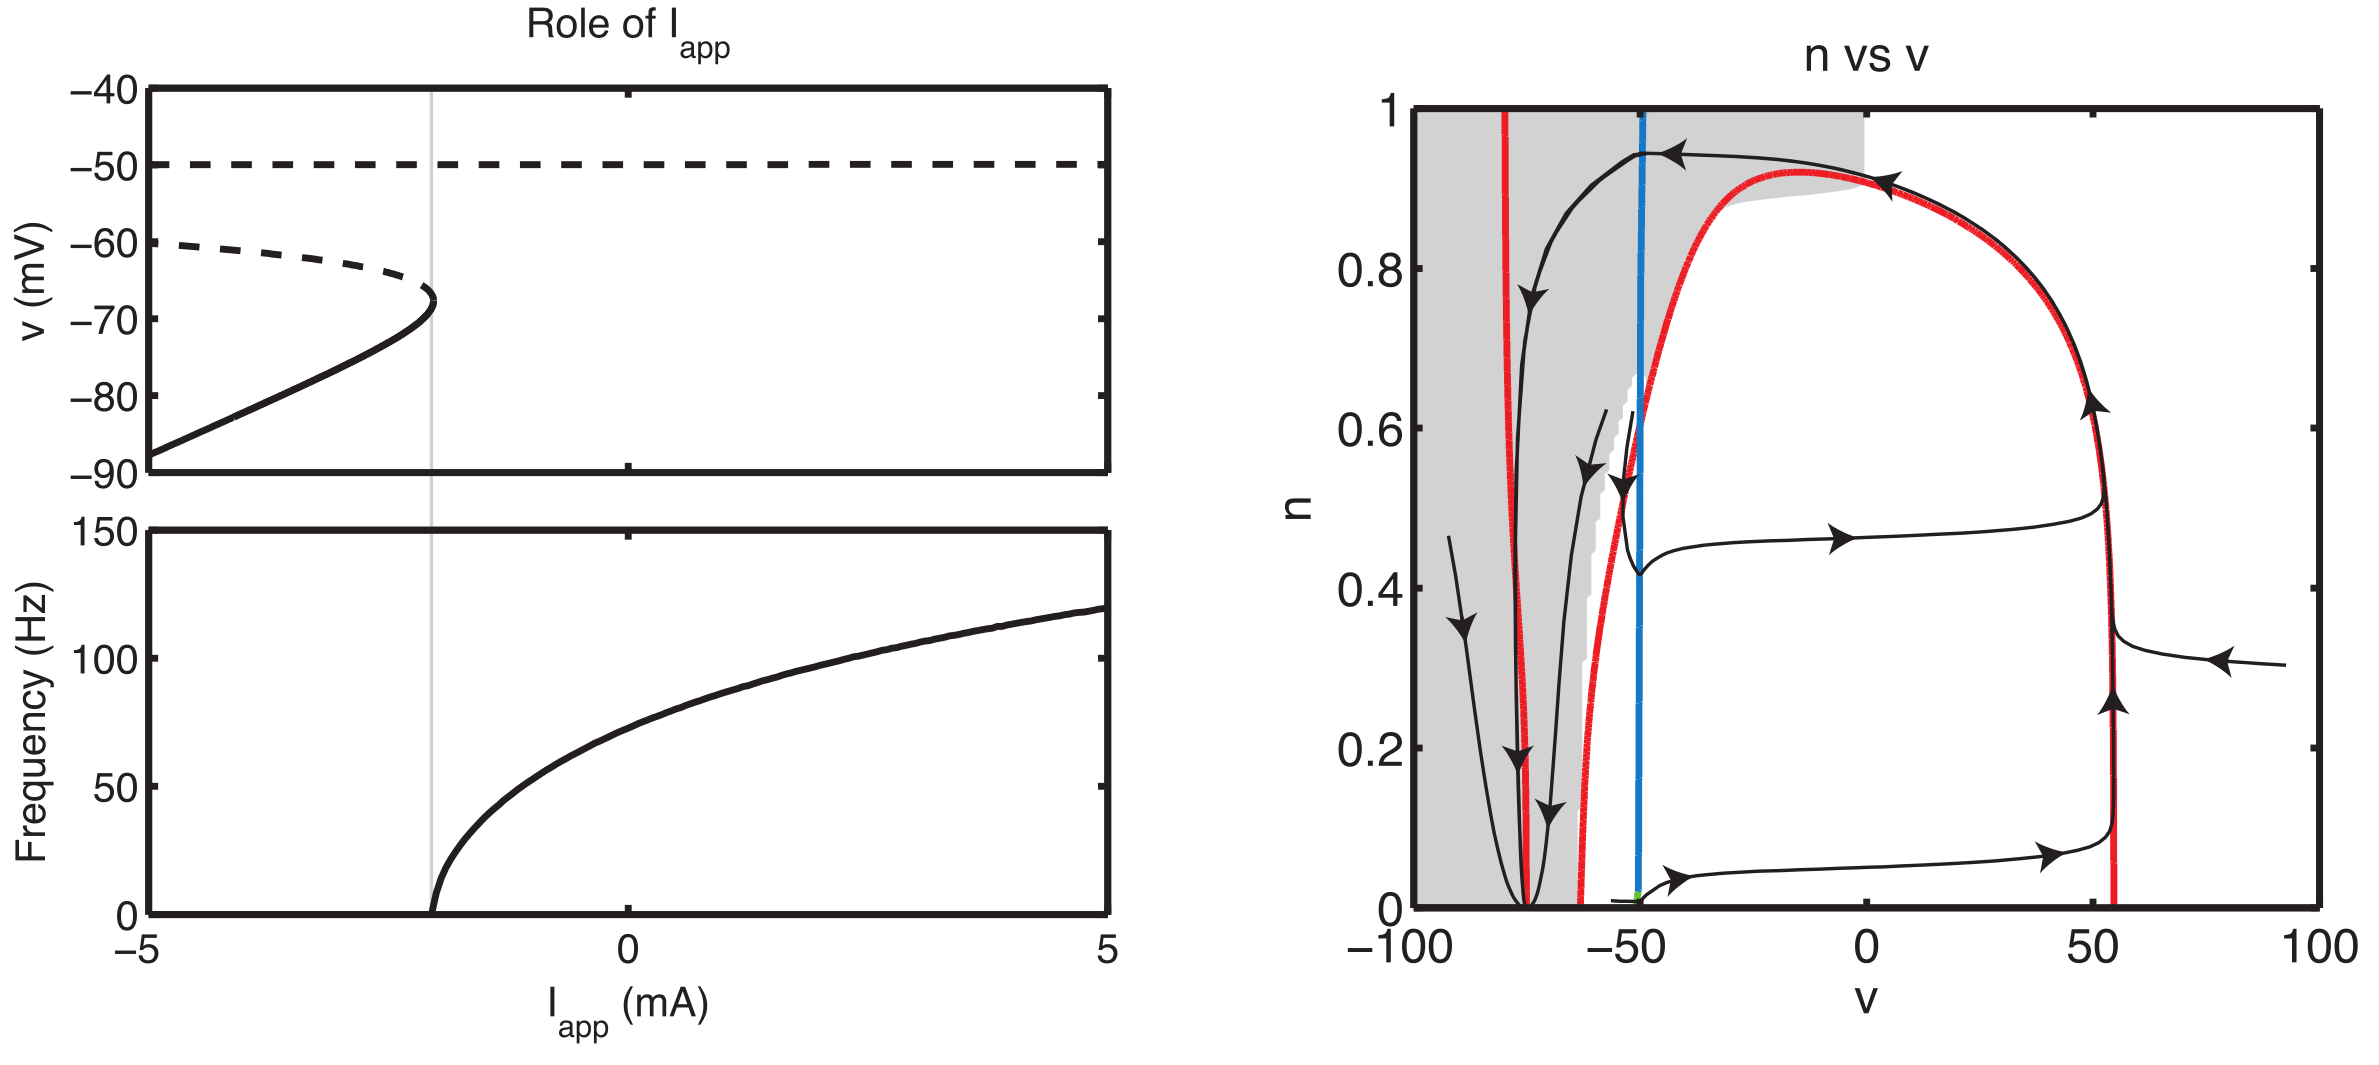 Dynamical systems analysis of action potential model